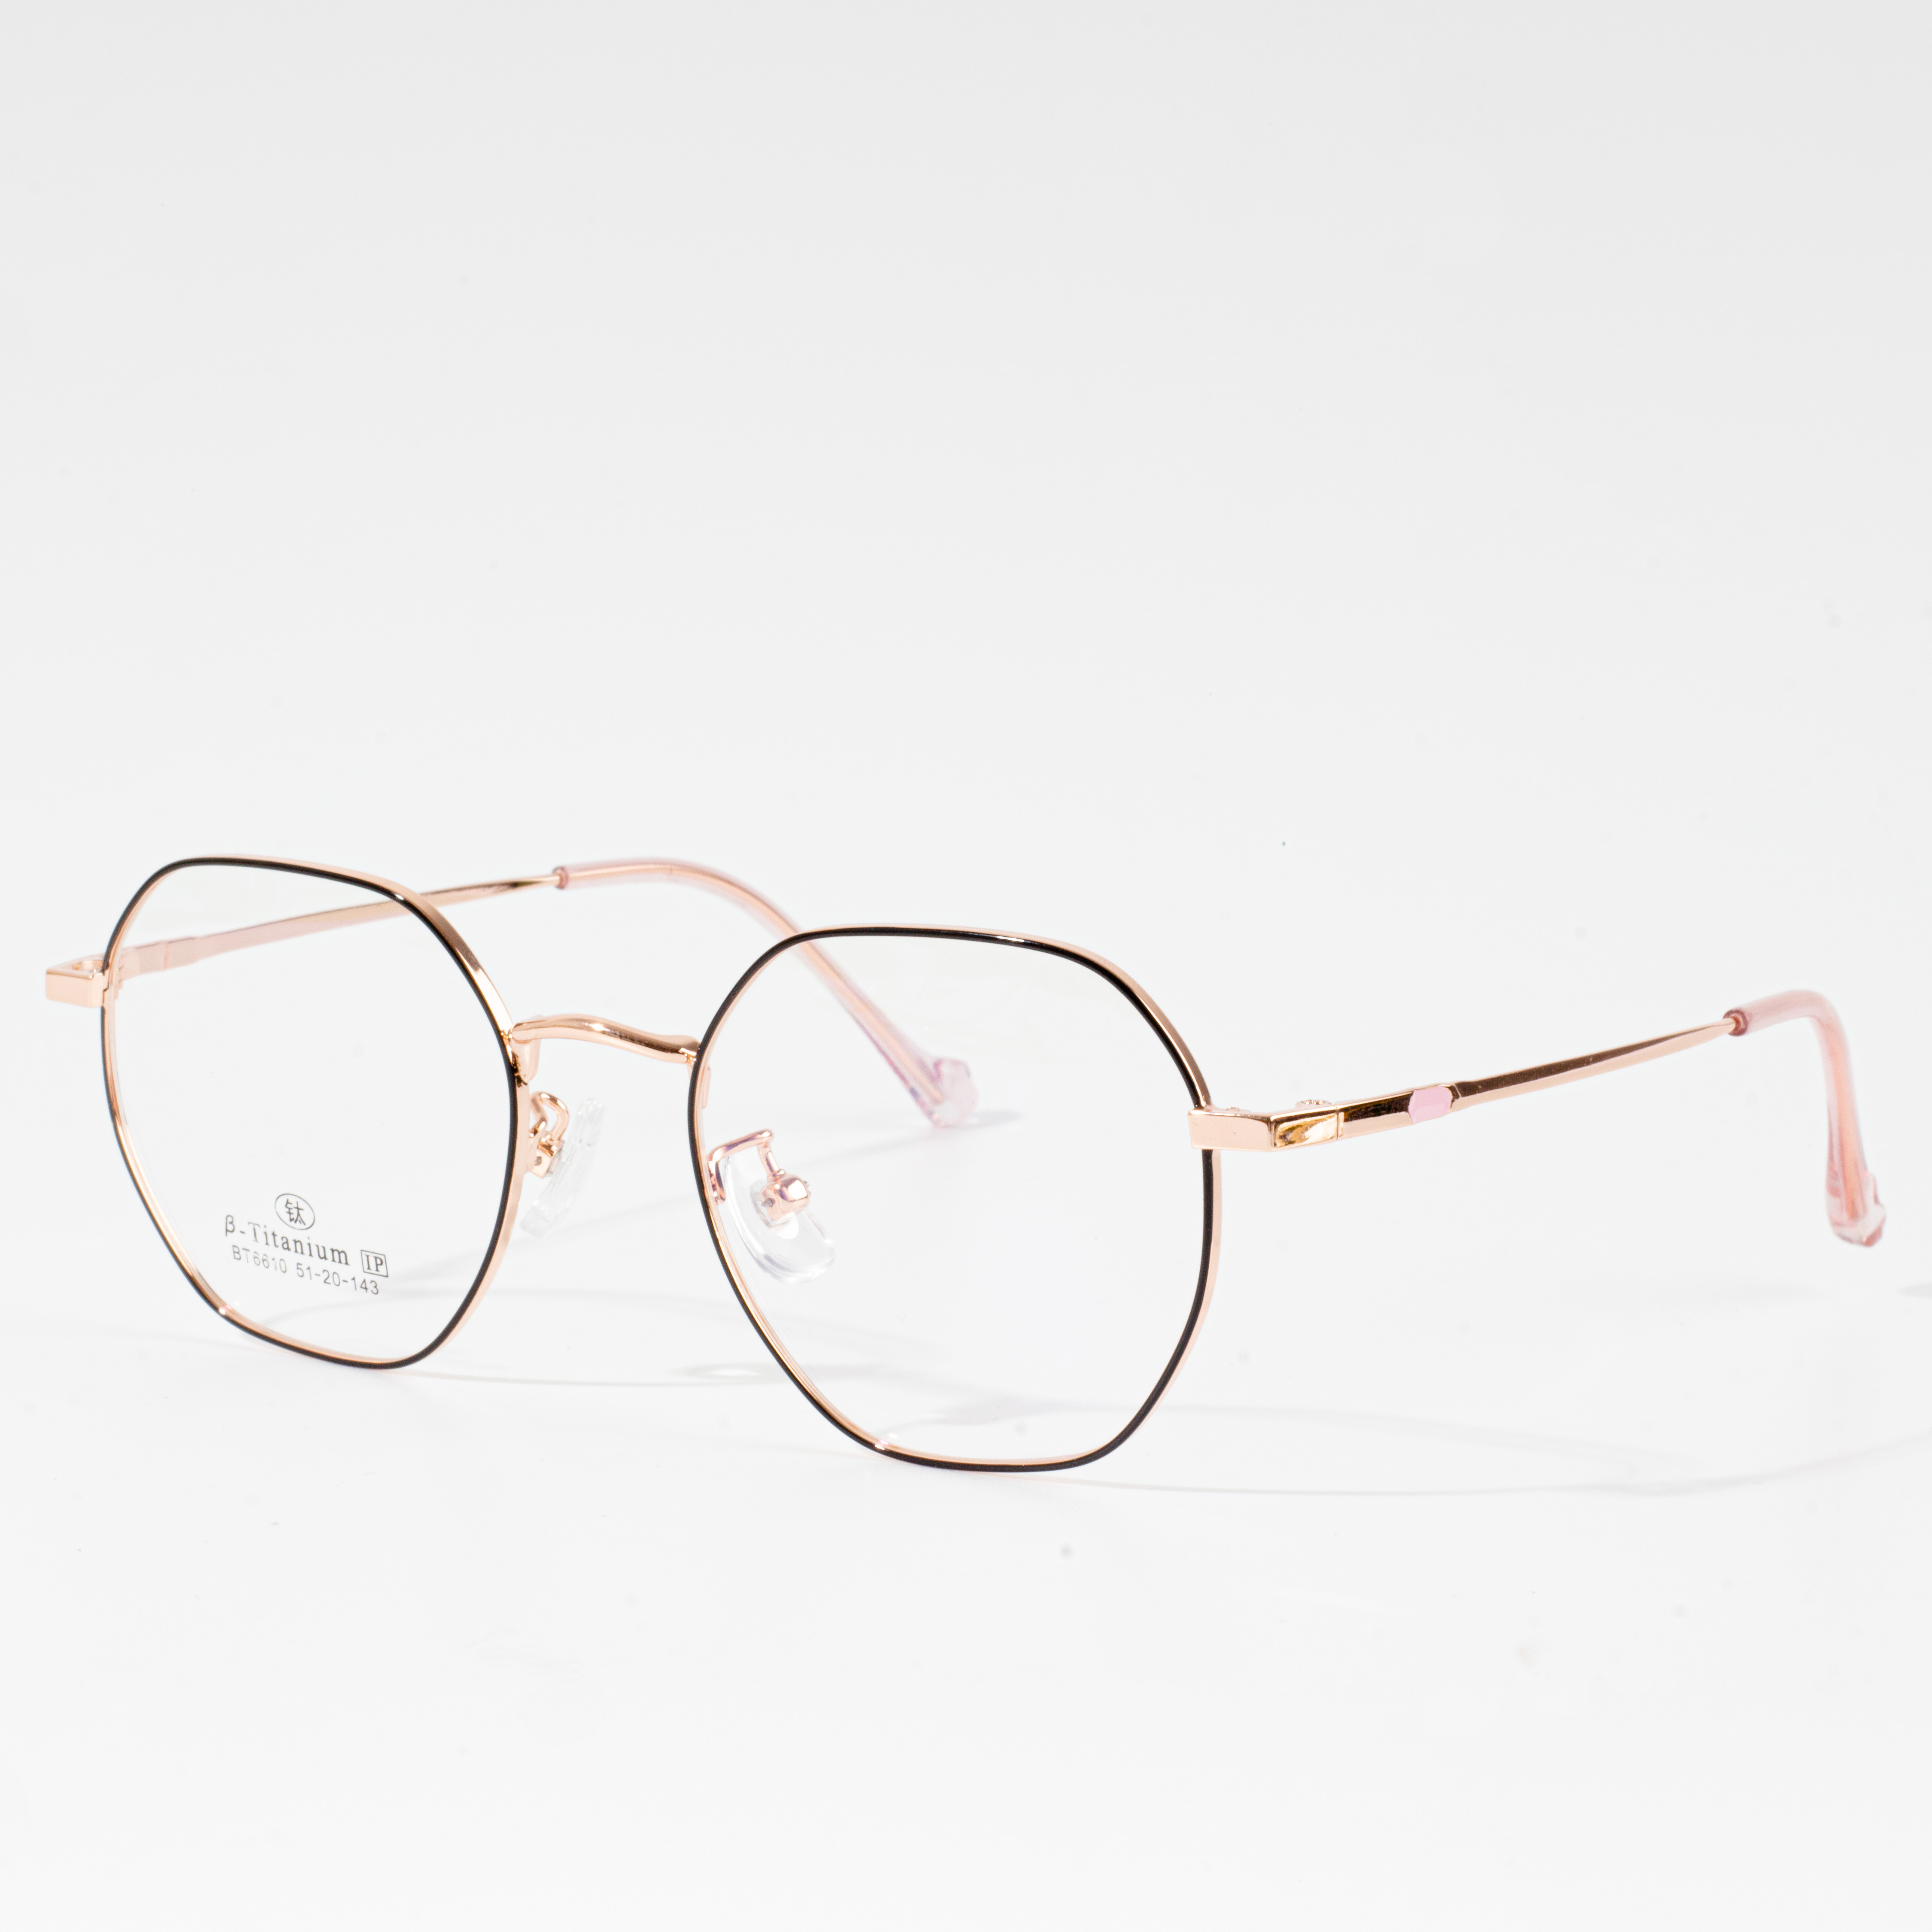 eyeglasses with changeable frames